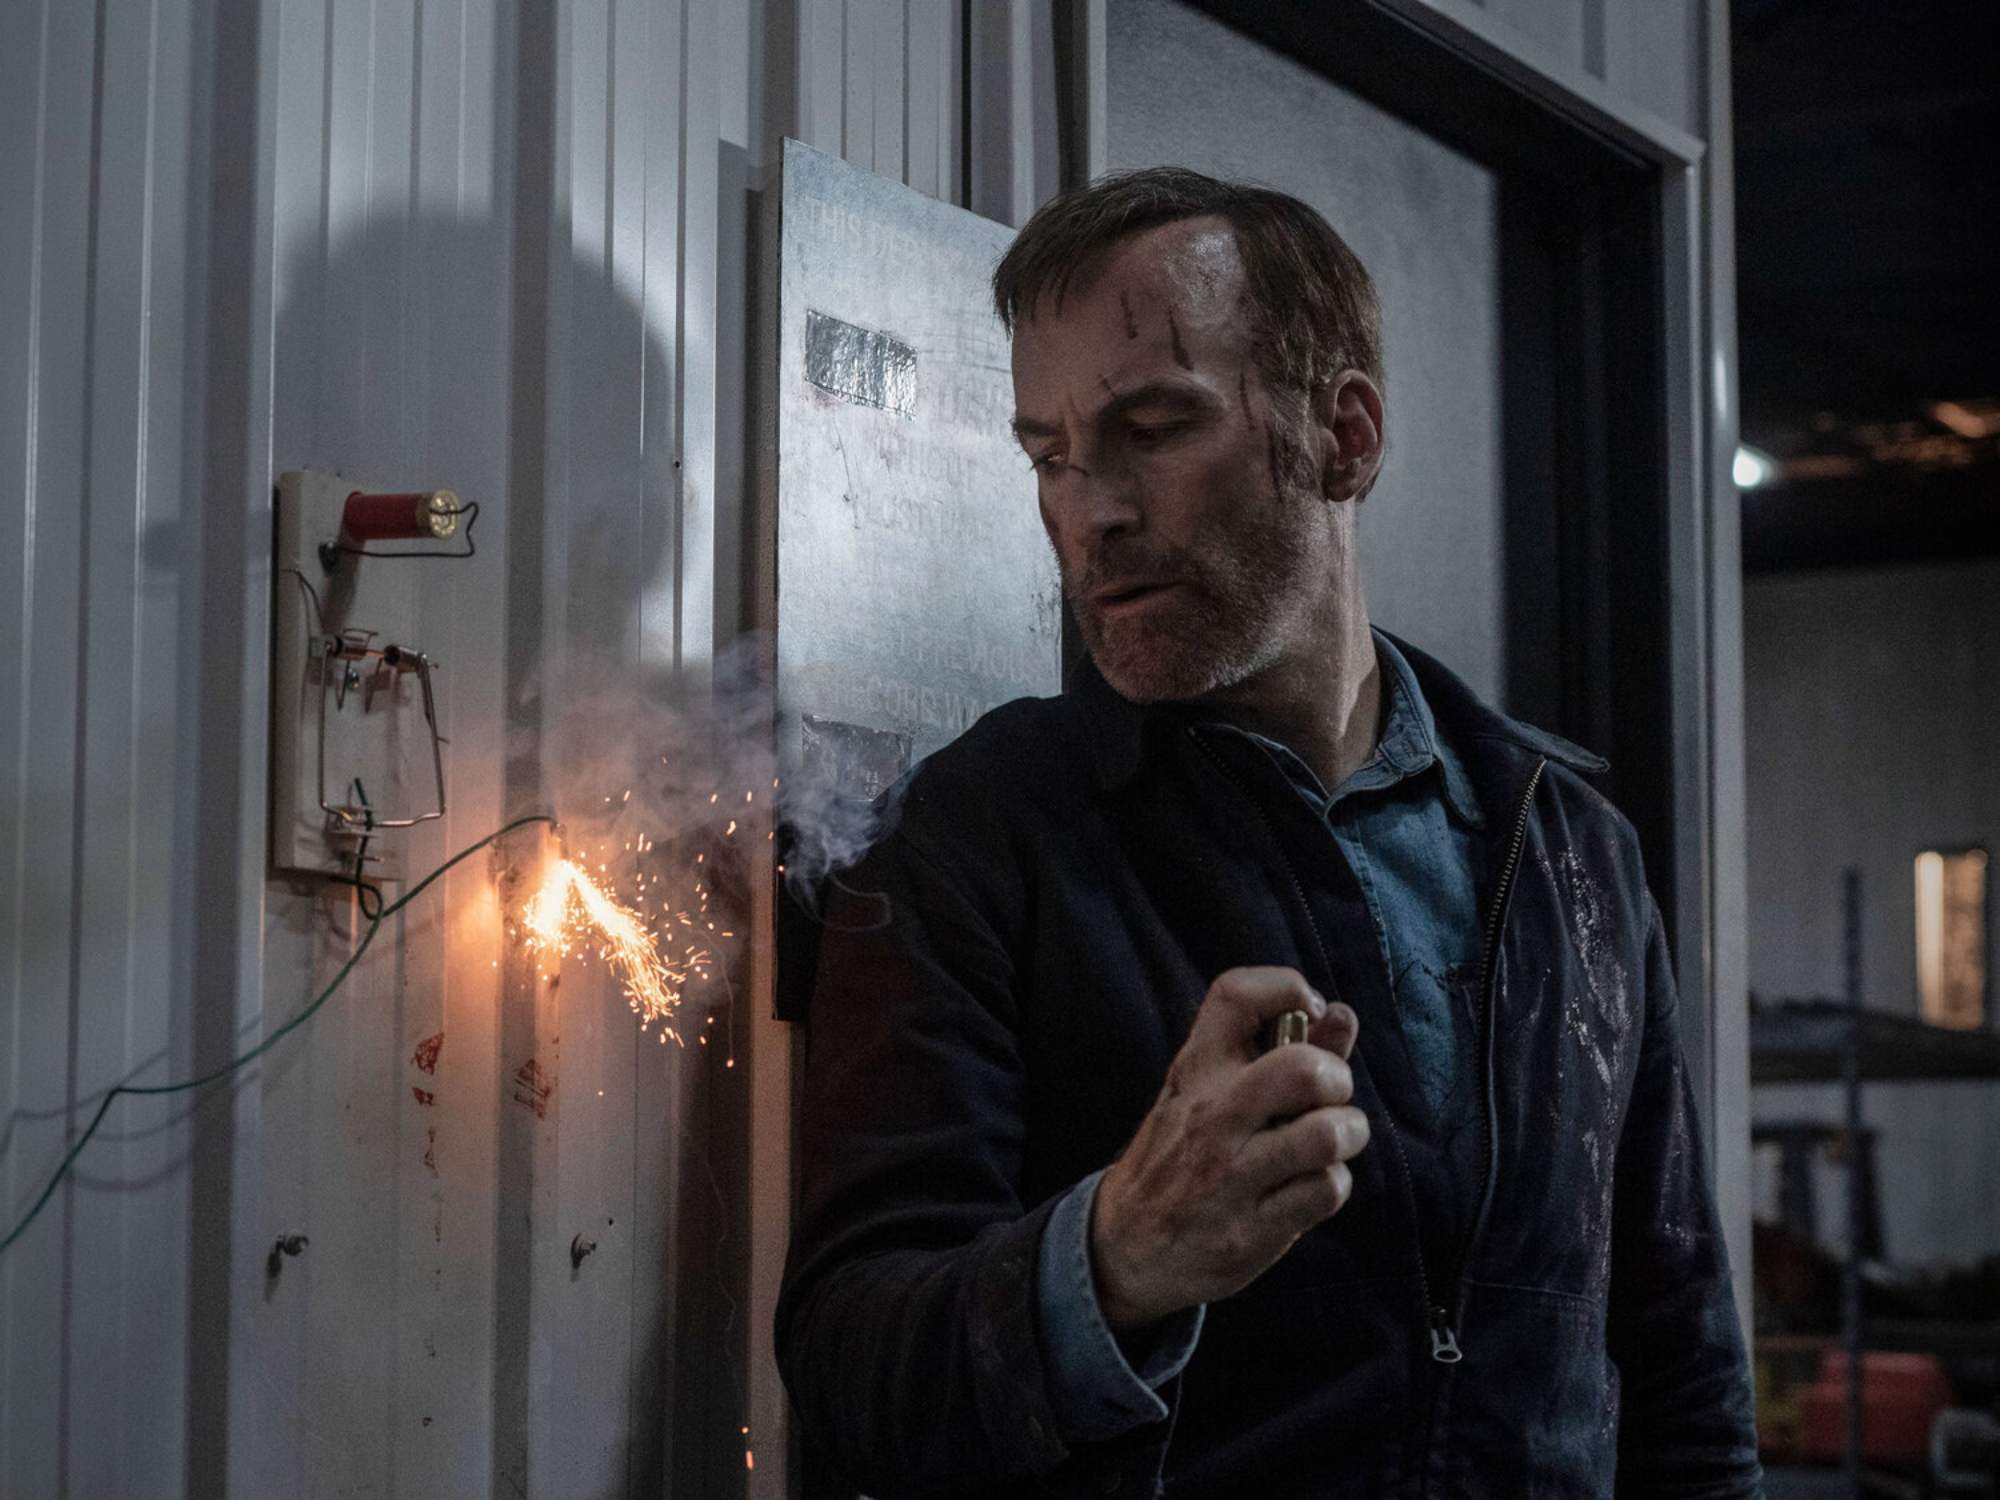 'Nobody' Bob Odenkirk as Hutch Mansell with his back against a wall and exposed wiring sparking.